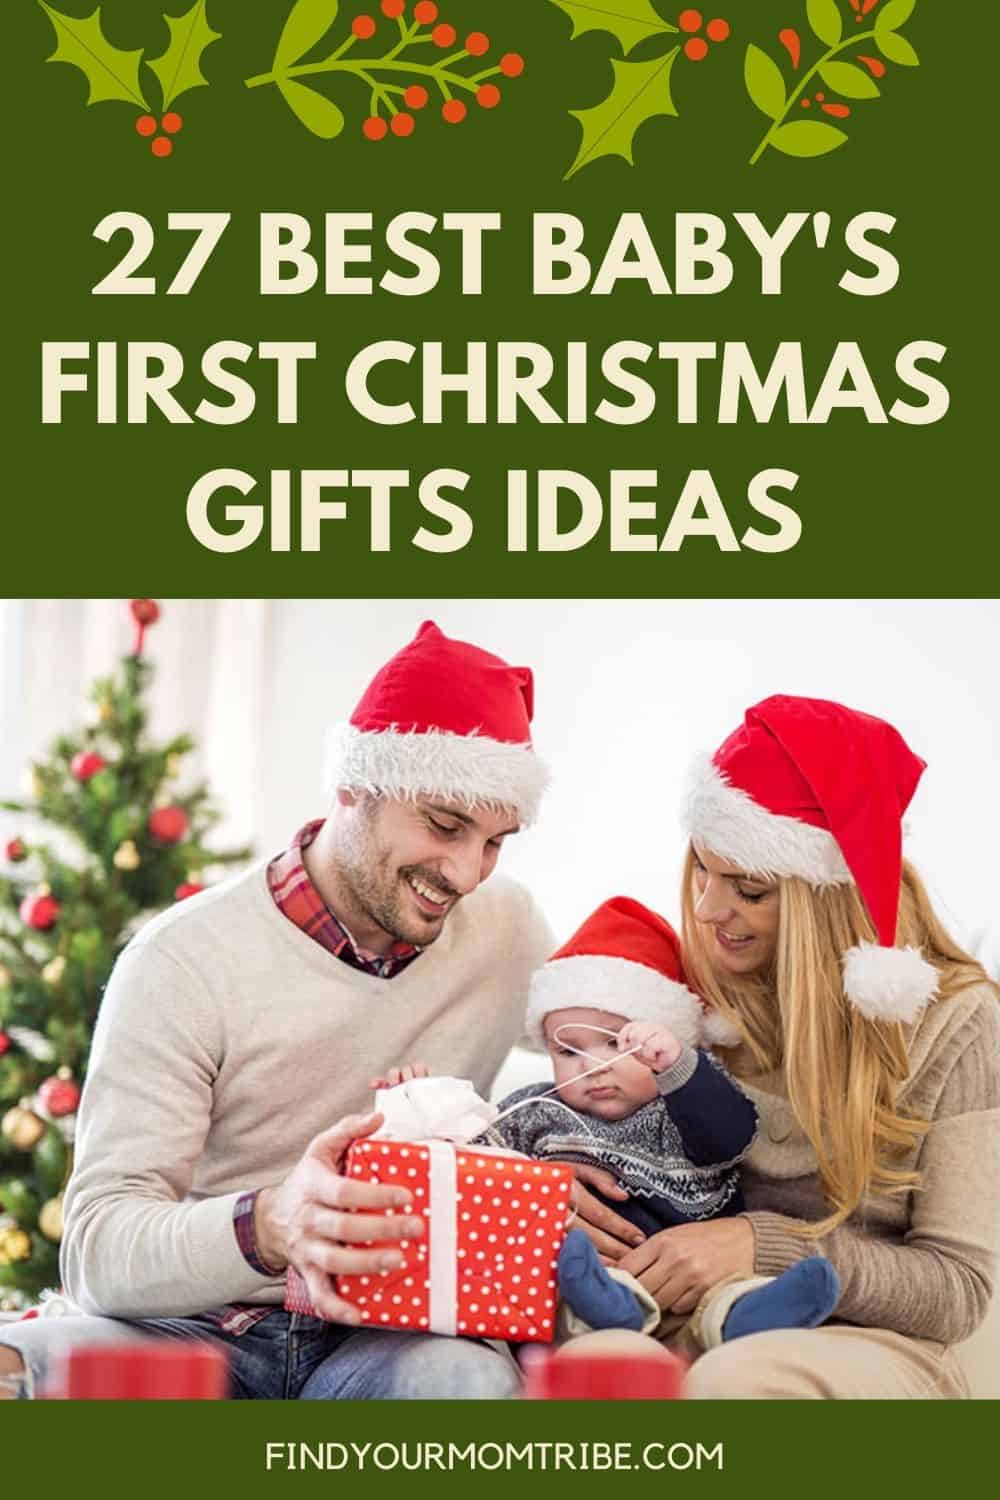 27 Best Baby's First Christmas Gifts Ideas 